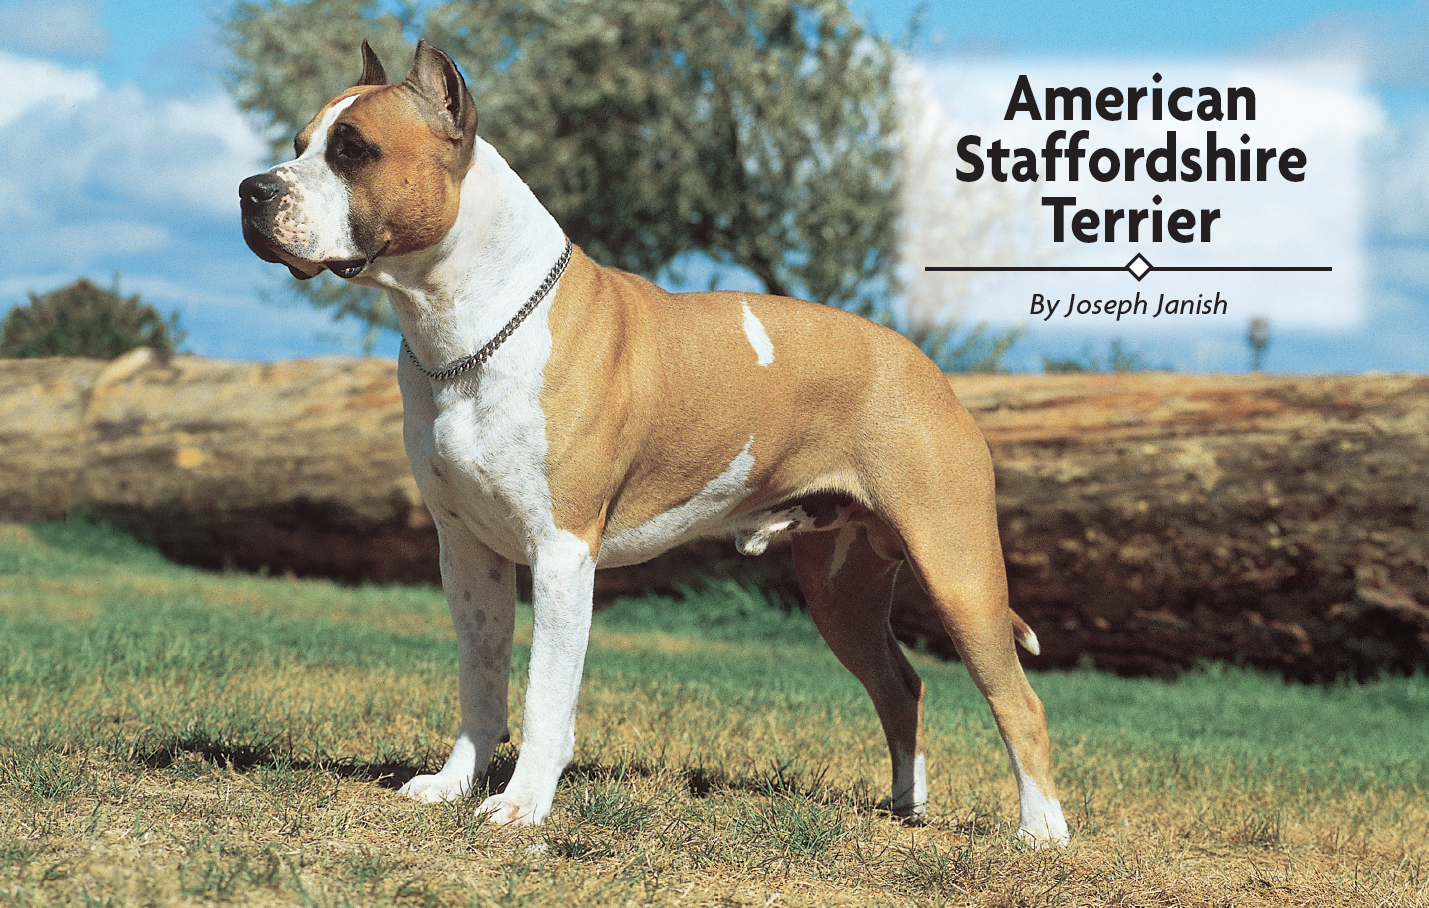 American Staffordshire Terrier - image 2